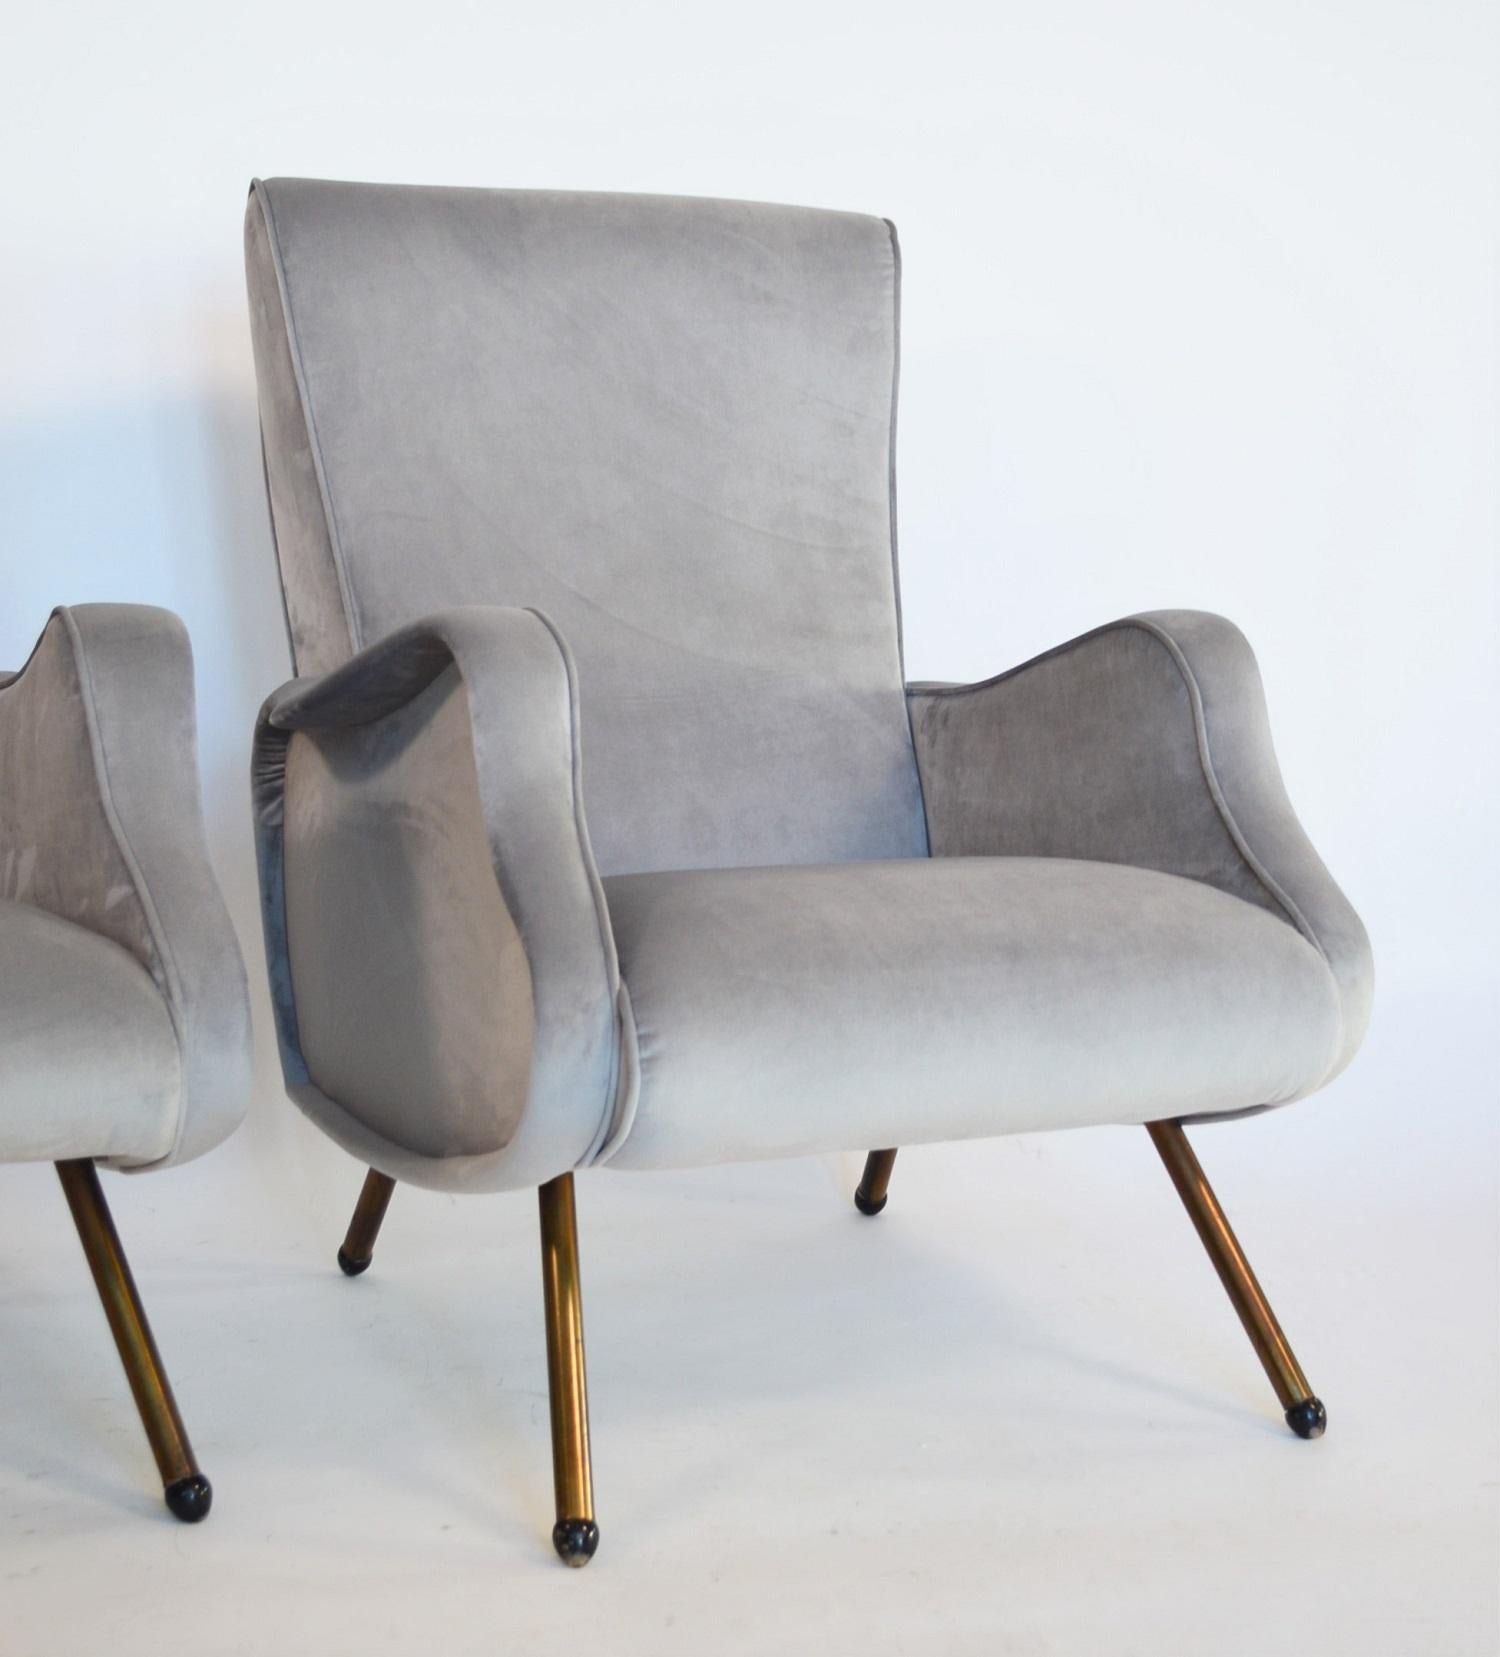 Italian Midcentury Armchairs Restored and Reupholstered in Grey Velvet, 1950s 2